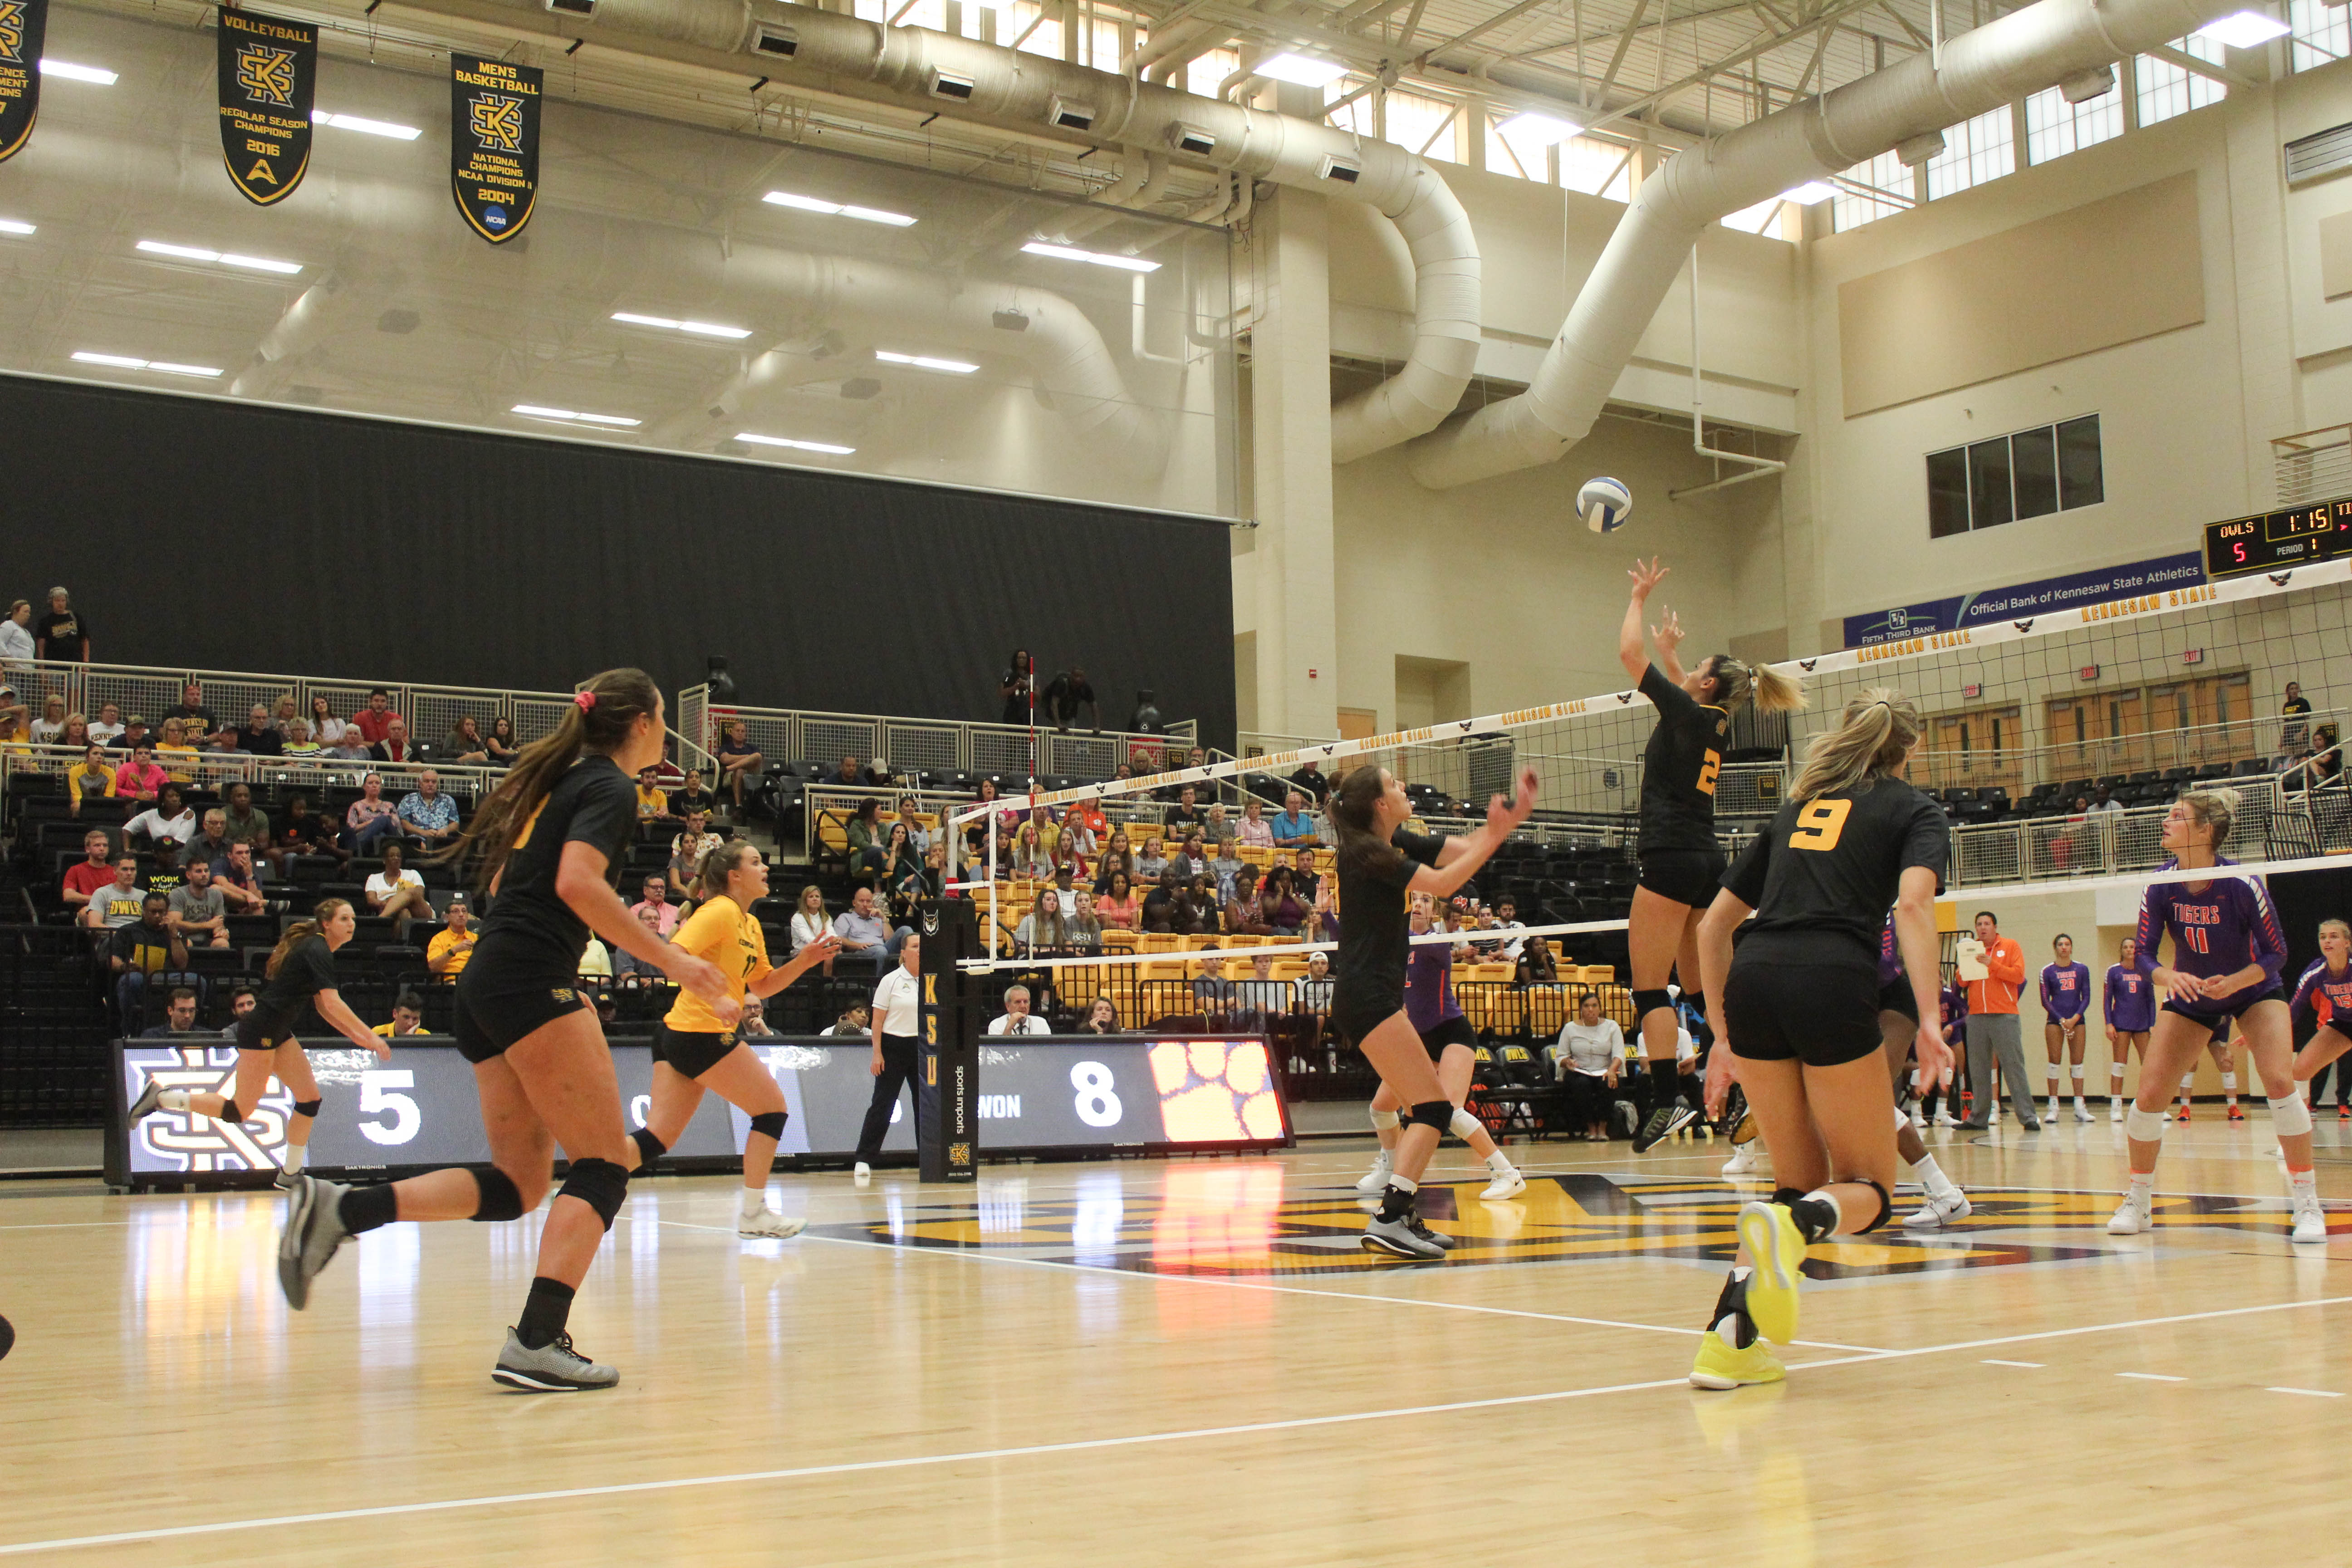 Winning streak ends for Volleyball after tough slate